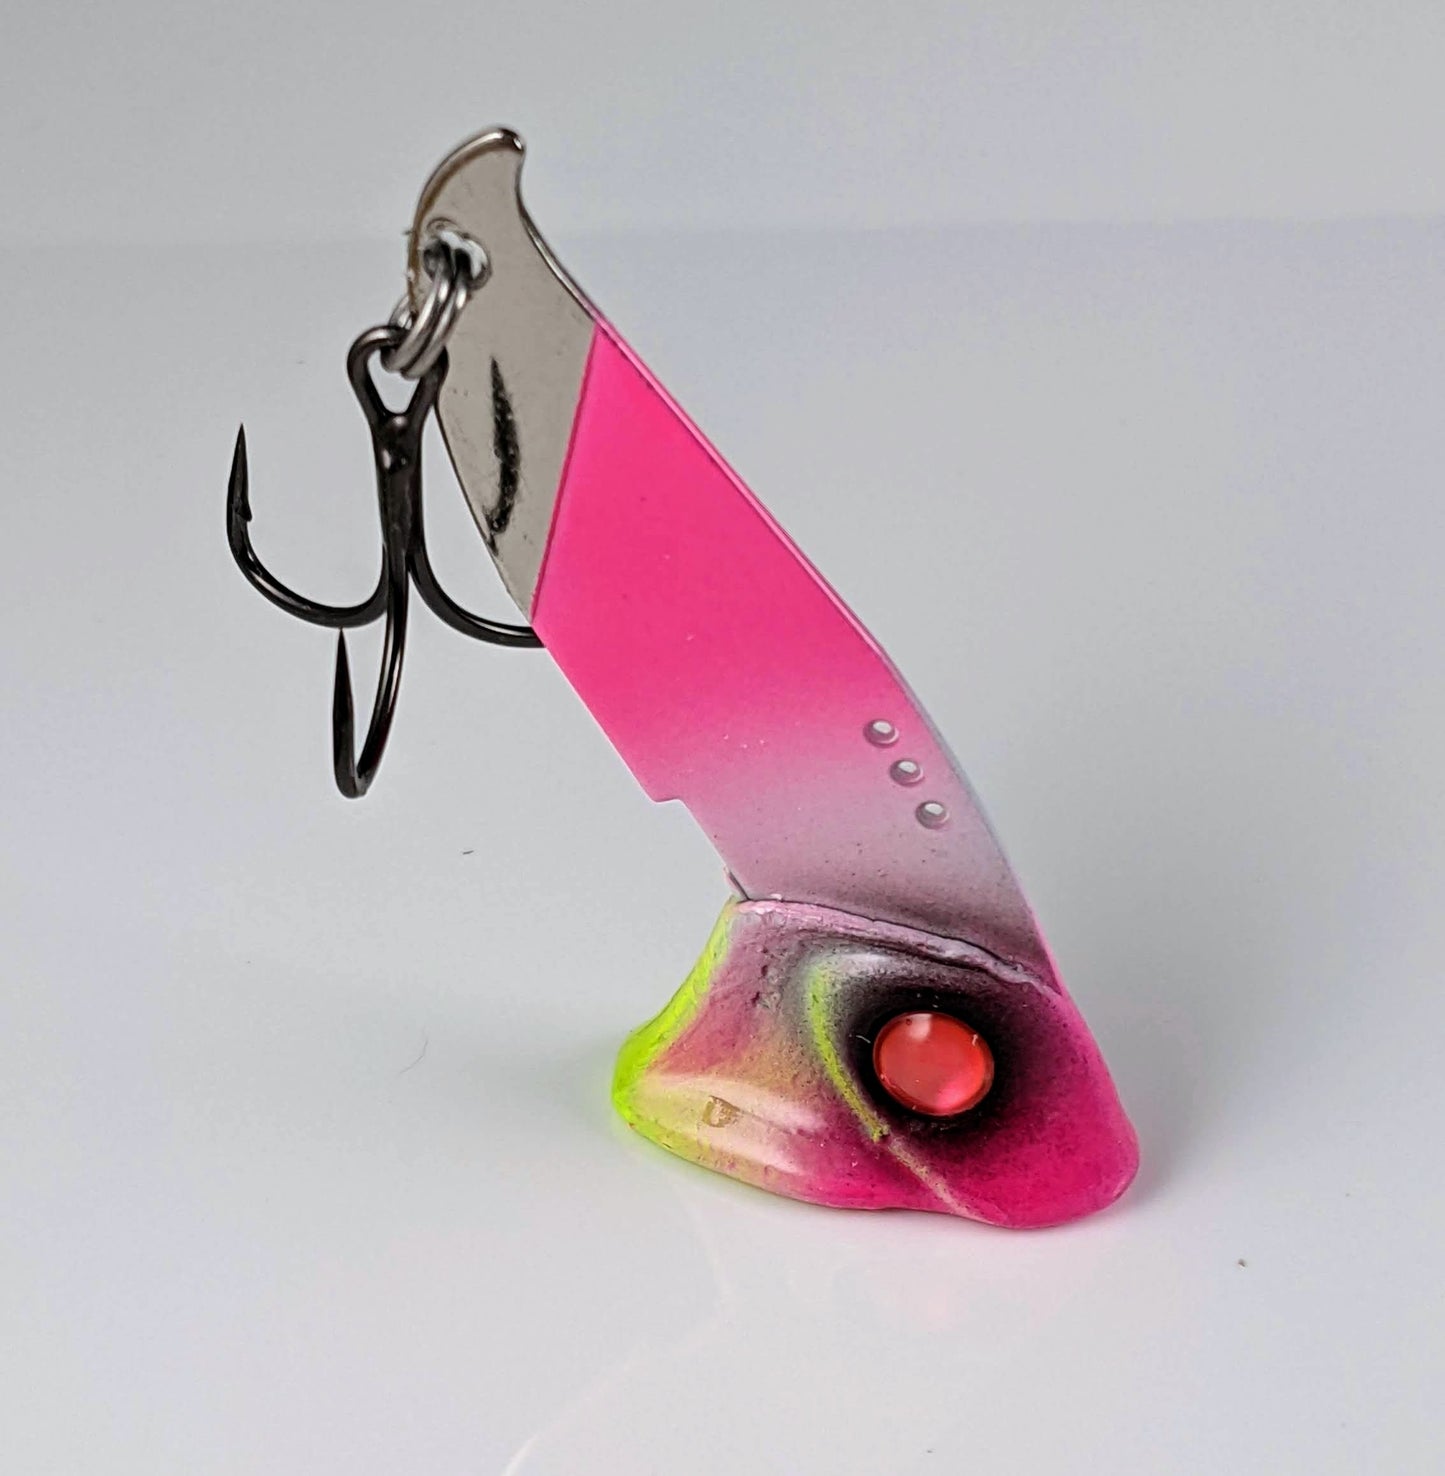 Vertical Jigs and Lures - Vertical Minnow Blade Bait - Lollipop - Vertical Jigs and Lures Custom Vertical Minnow